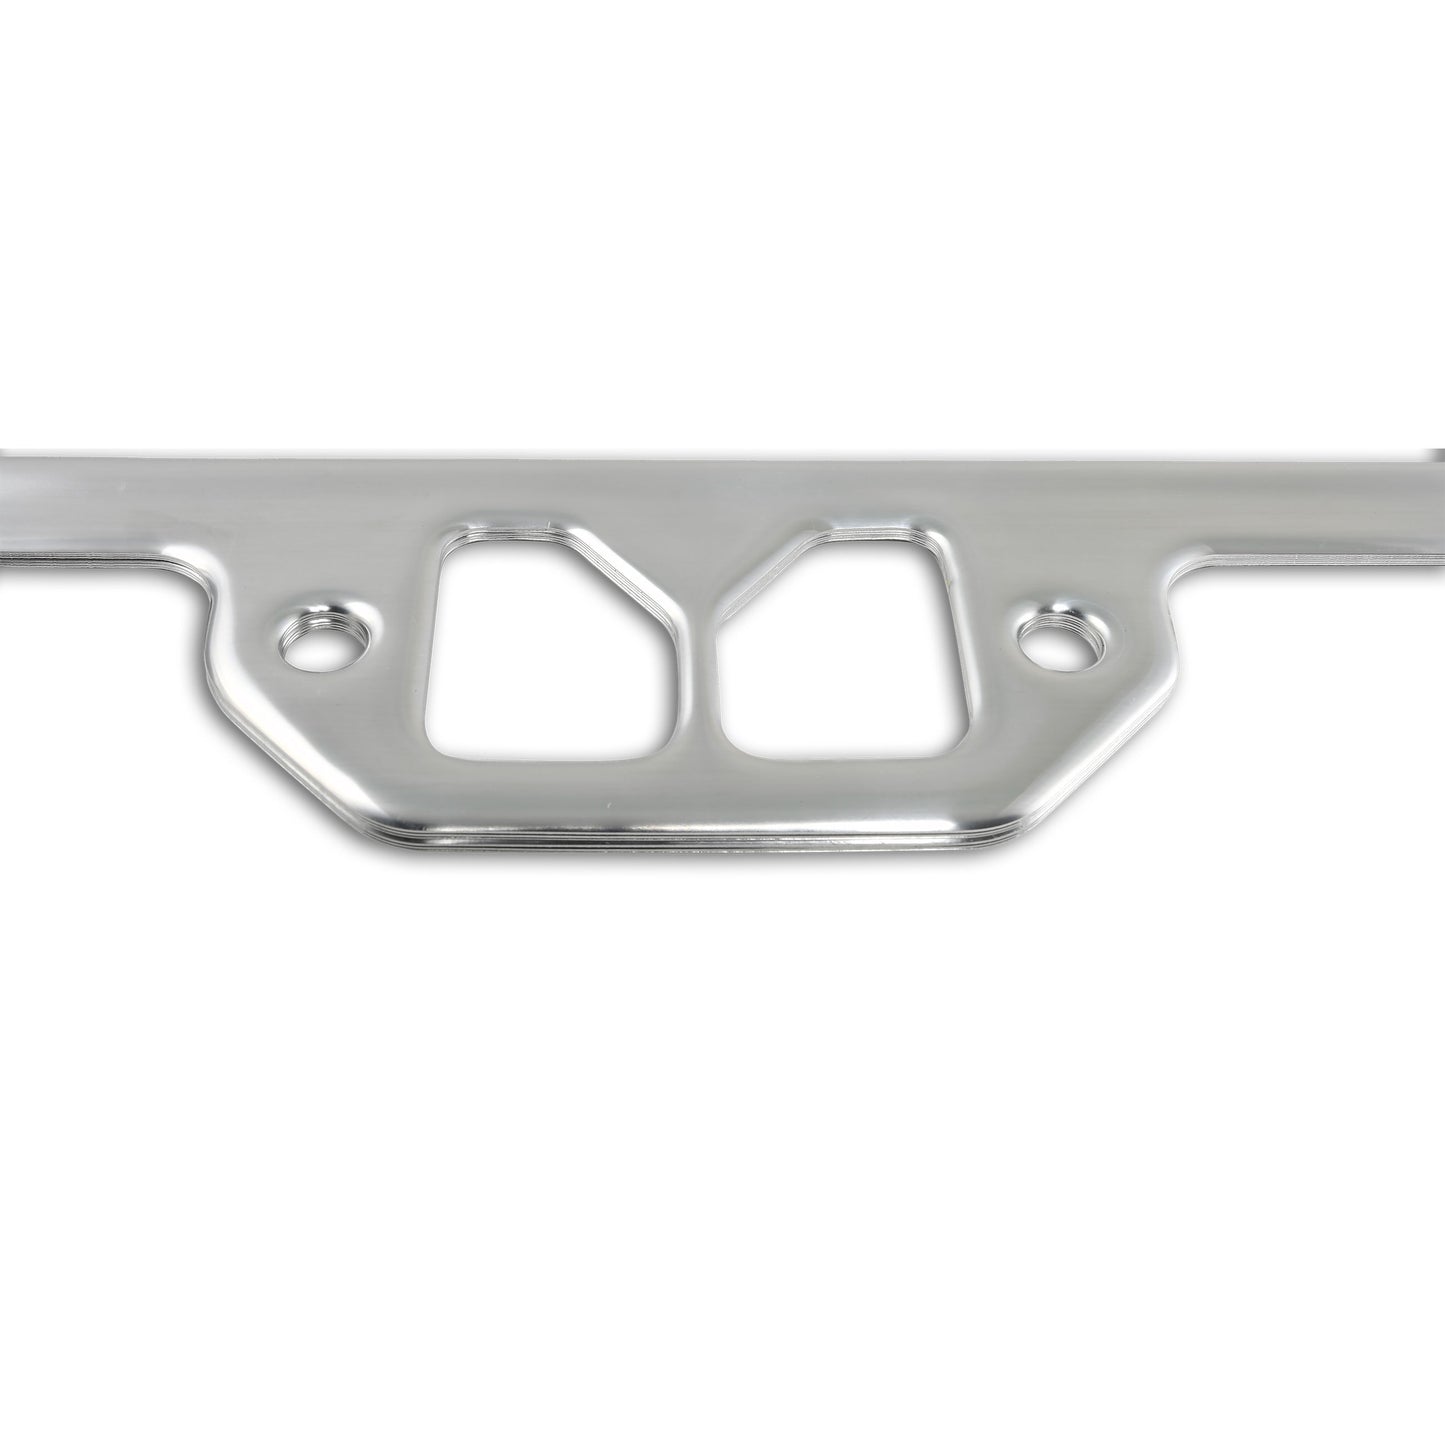 Patriot Exhaust 66037 Seal-4-Good Gaskets Chrysler SB 273-360 rectangle/square 1 in x 1.625 in